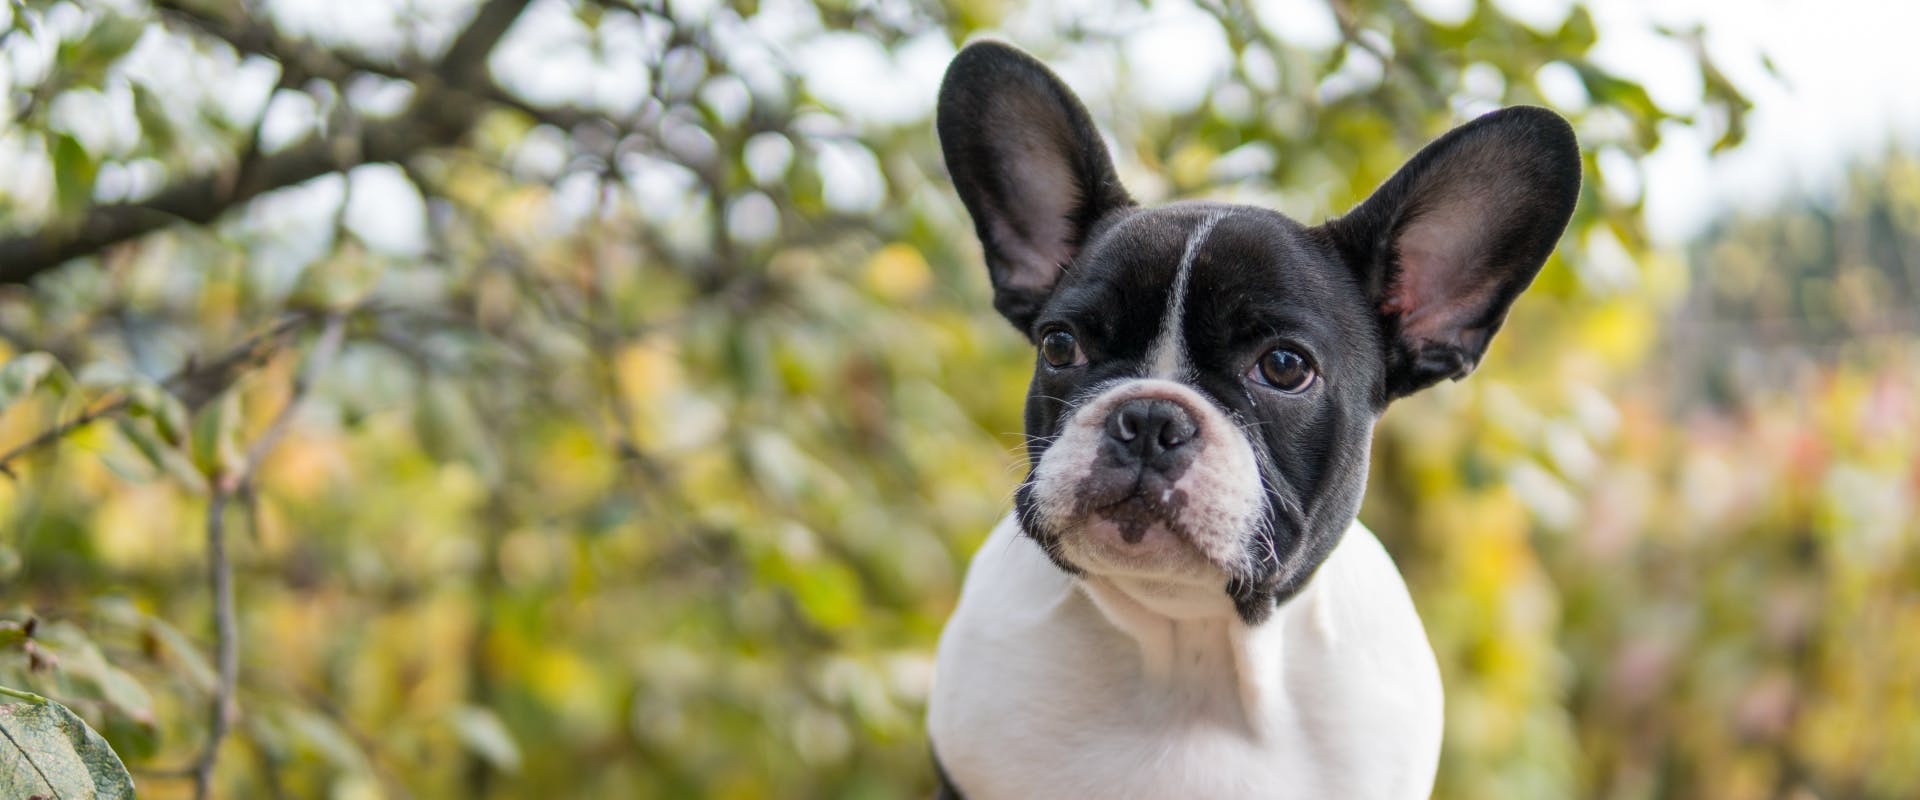 A black and white Frenchie puppy.